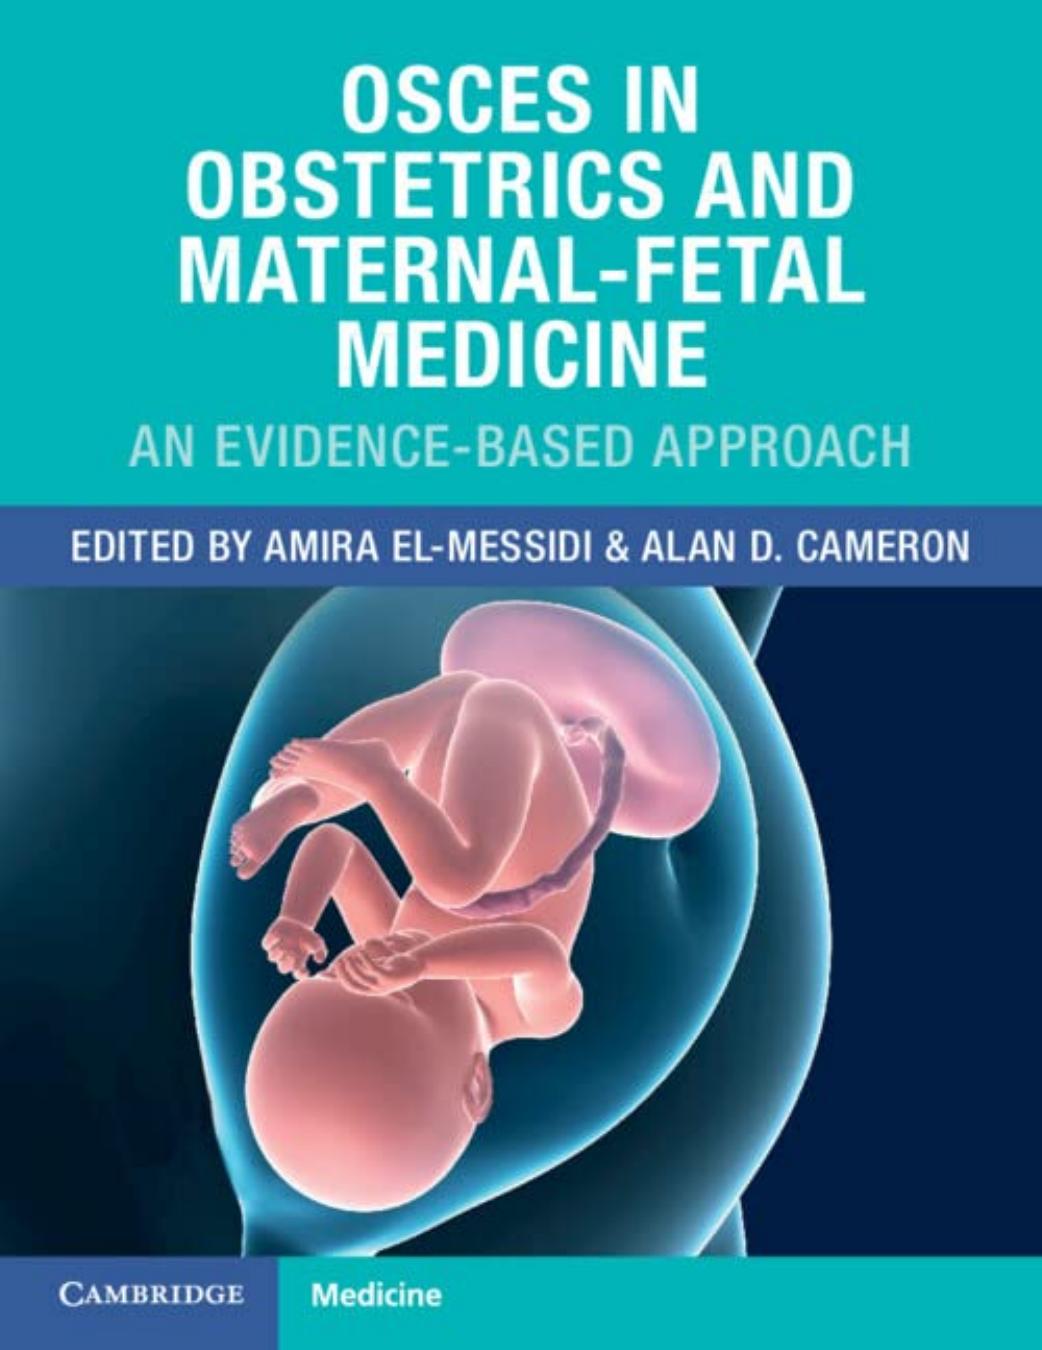 OSCEs in Obstetrics and Maternal-Fetal Medicine: An Evidence-Based Approach by Amira El-Messidi Alan D. Cameron